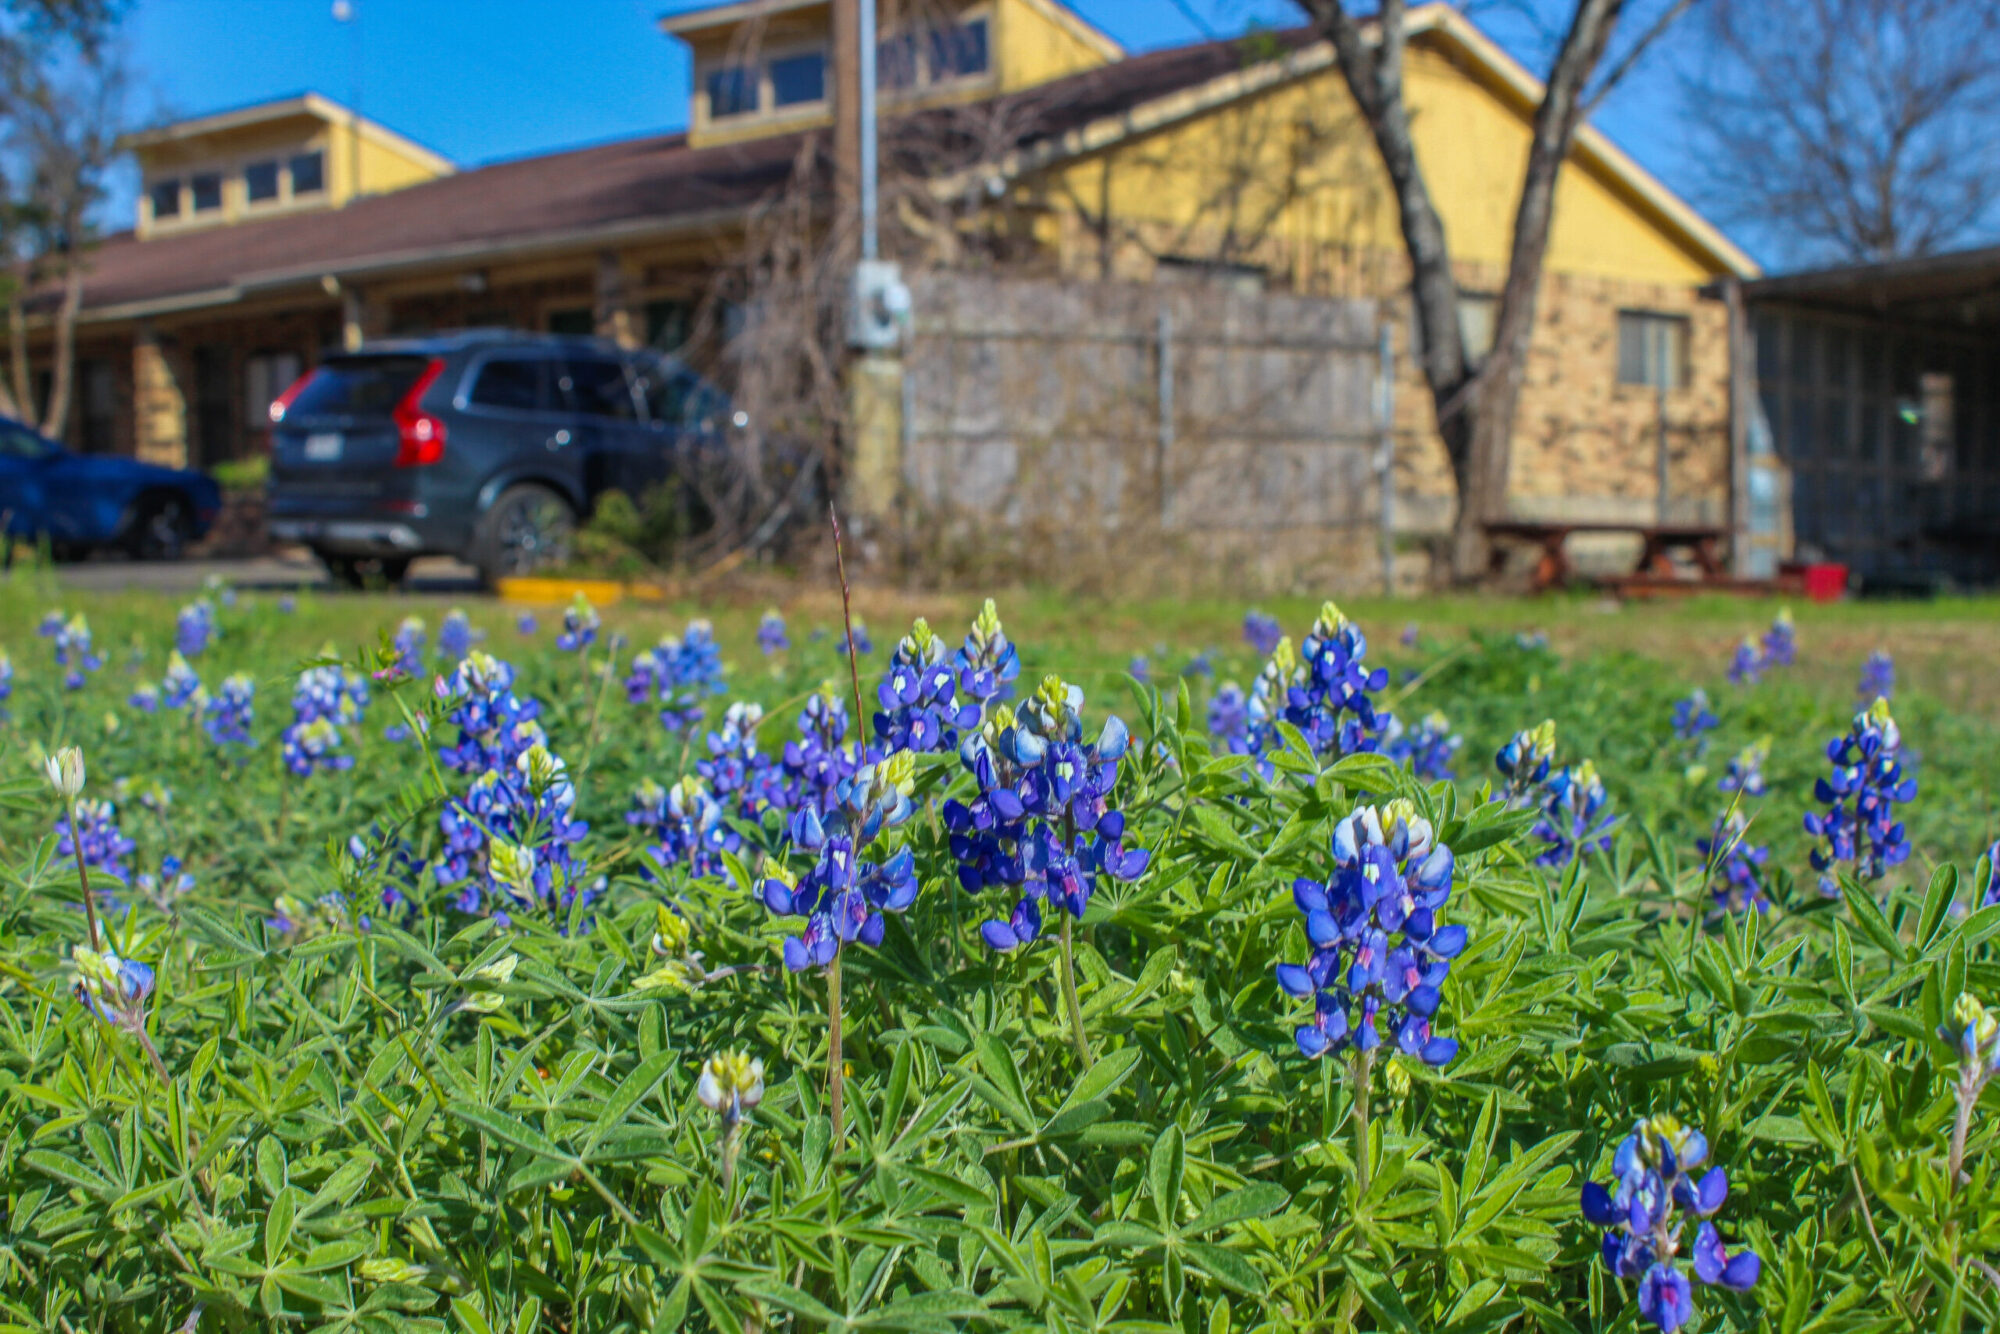 Bluebonnets in the foreground with the District office in the background